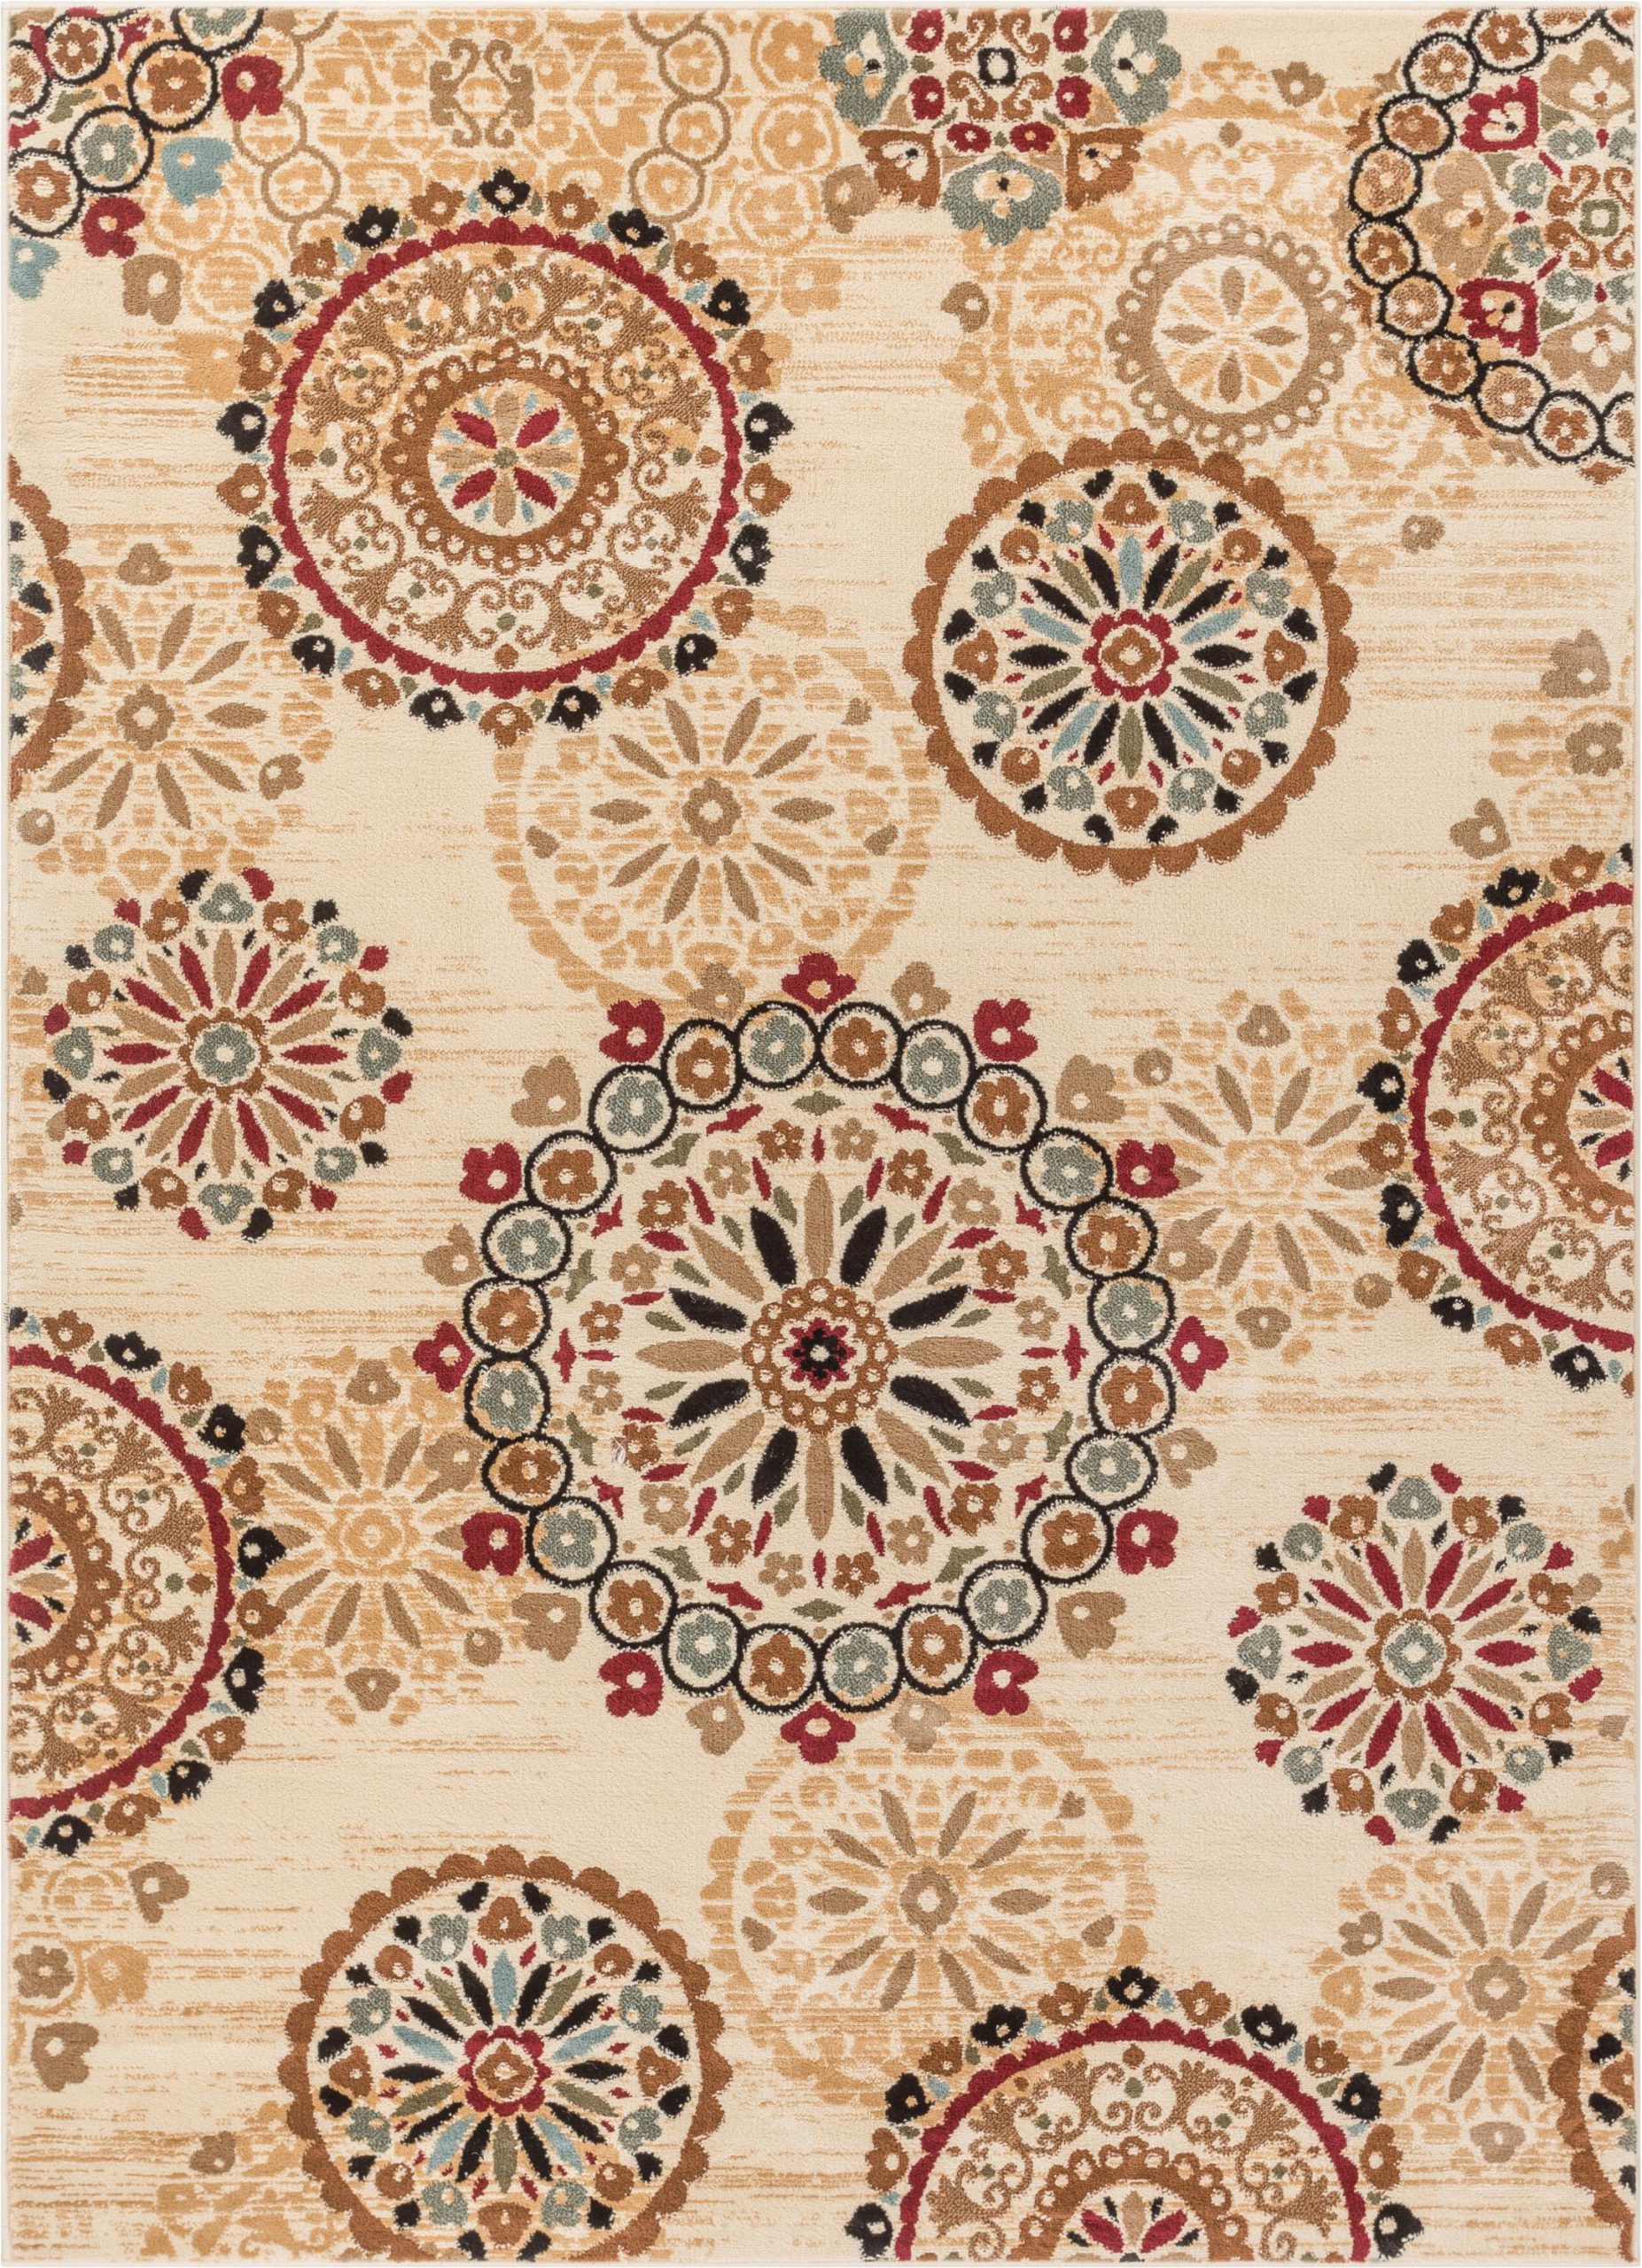 Better Homes Gardens Suzani Indoor area Rug Rosy Suzani Ivory Multi Red Green oriental Floral Geometric Modern Casual area Rug Easy Clean Stain Fade Resistant Shed Free Contemporary formal